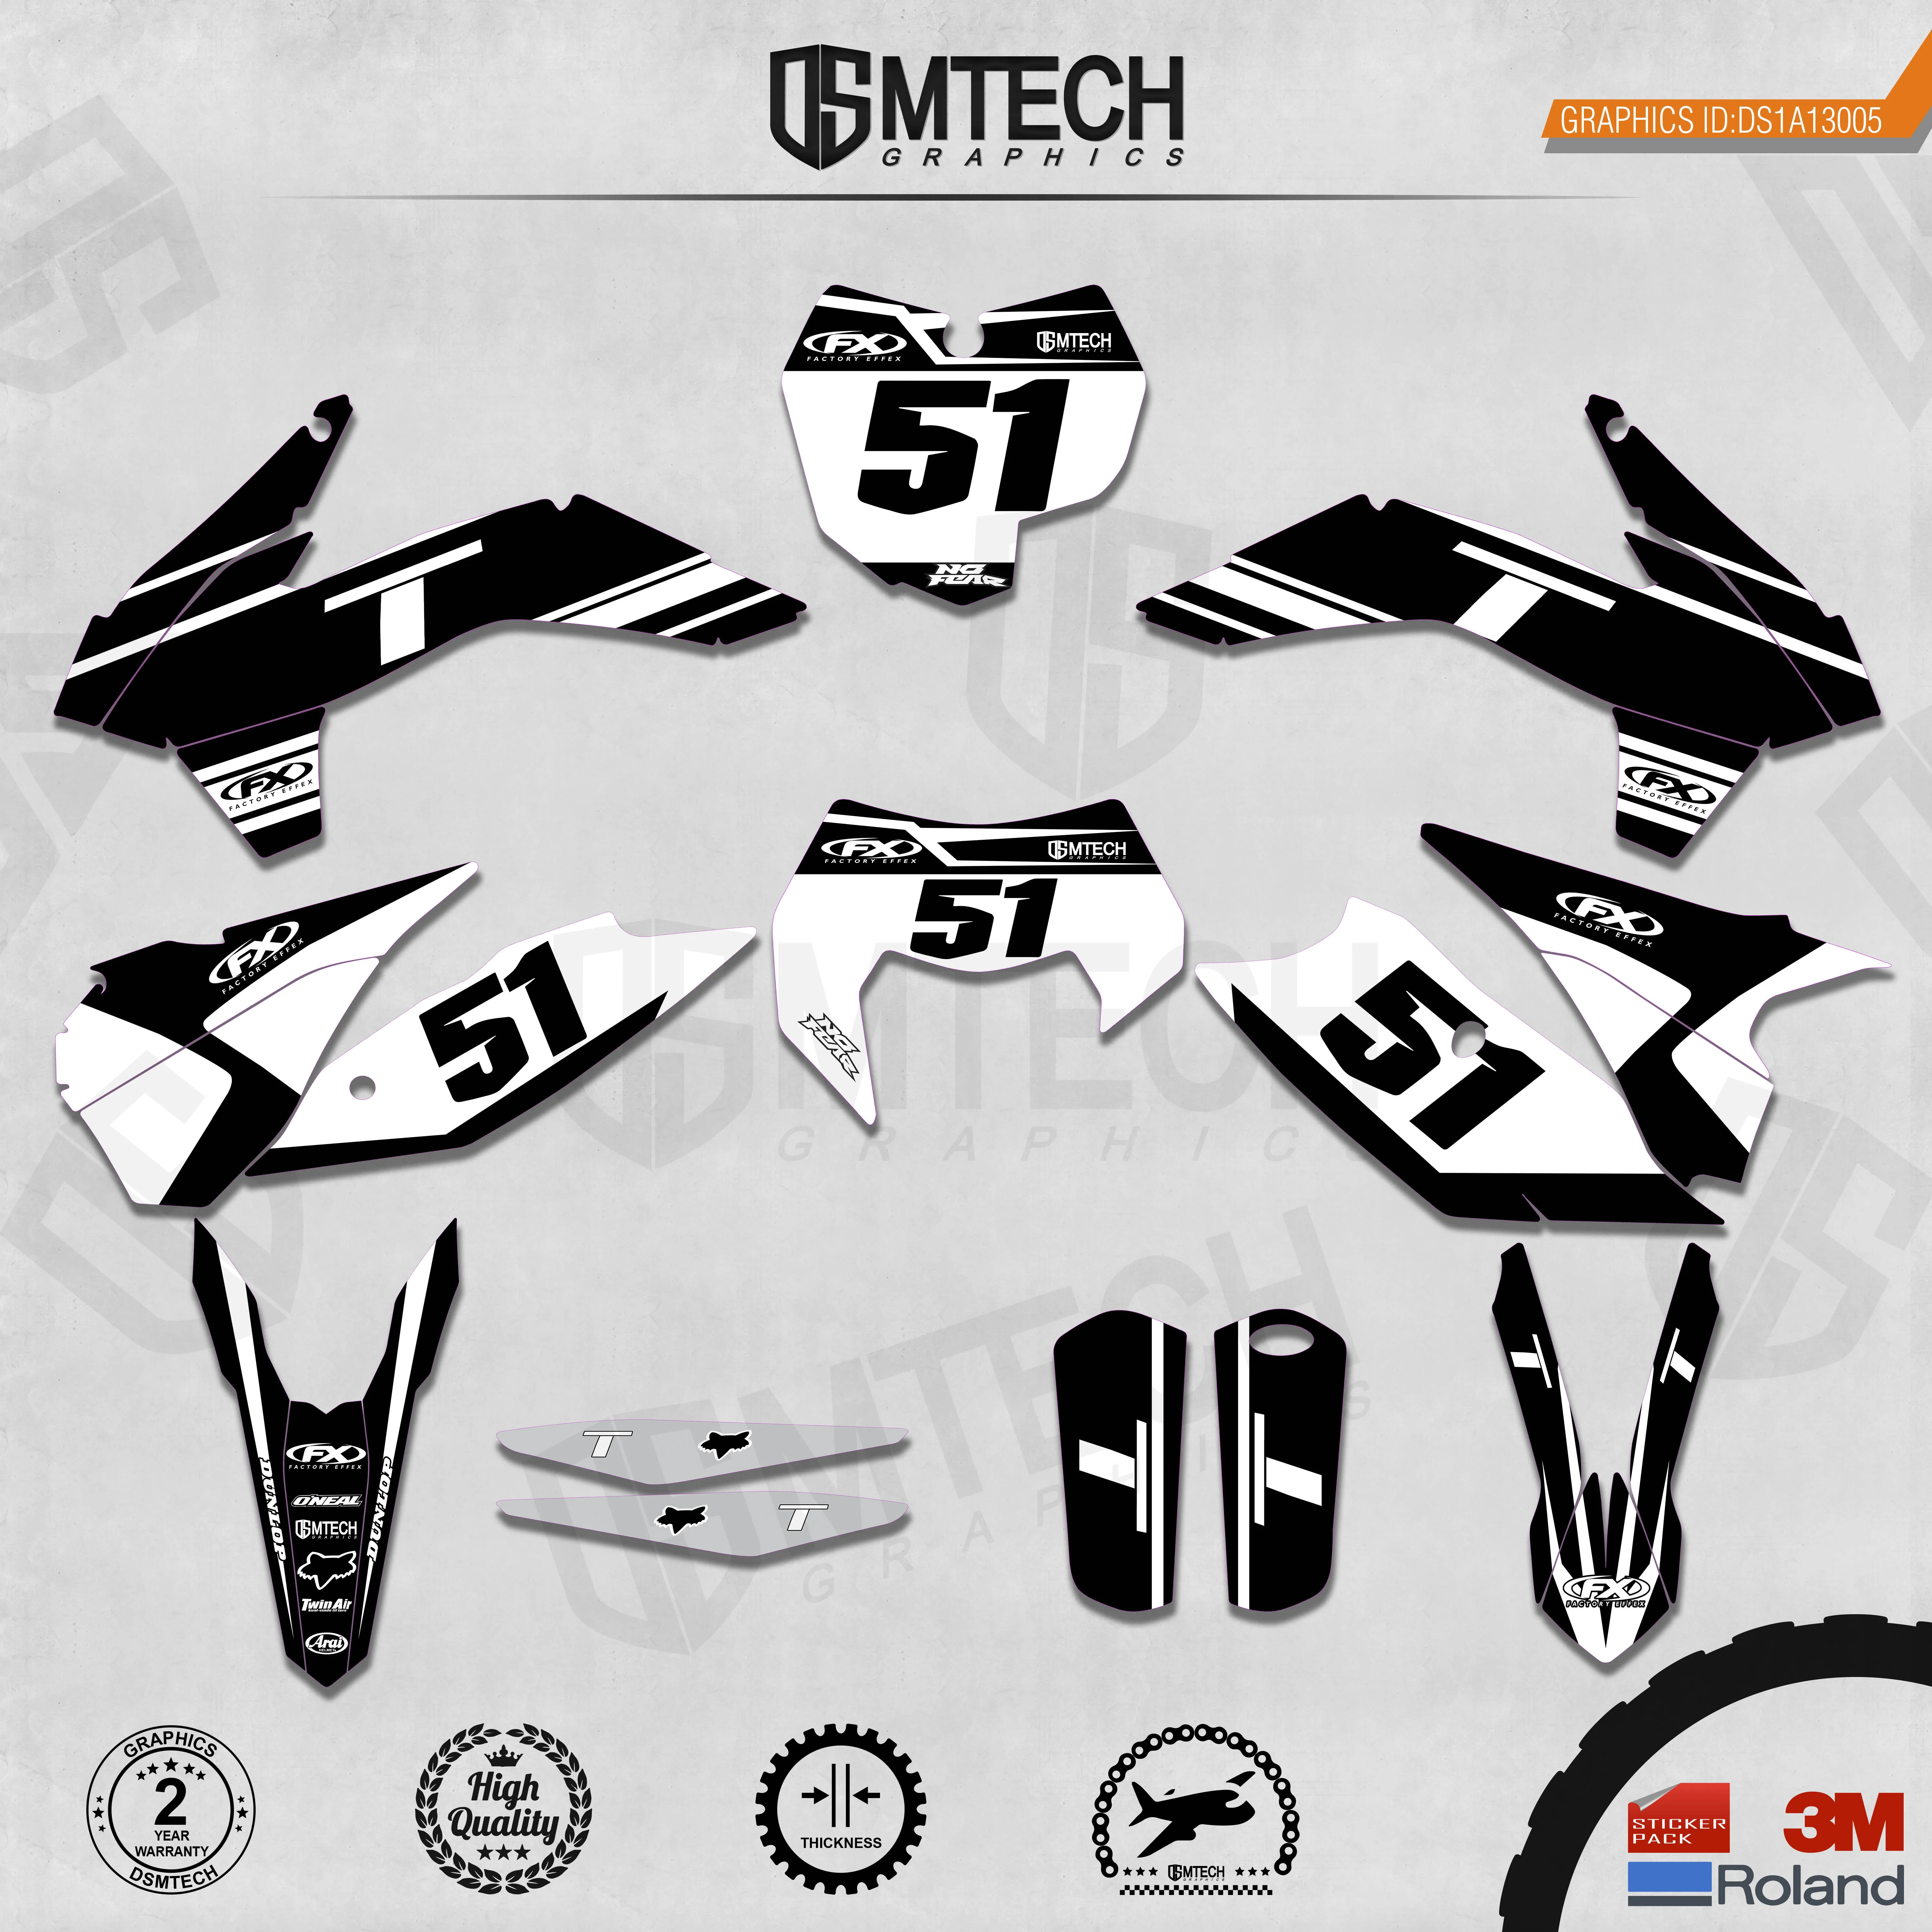 DSMTECH Customized Team Graphics Backgrounds Decals 3M Custom Stickers For 2013-2014 SXF 2015 SXF 2014-2015 EXC 2016 EXC  005